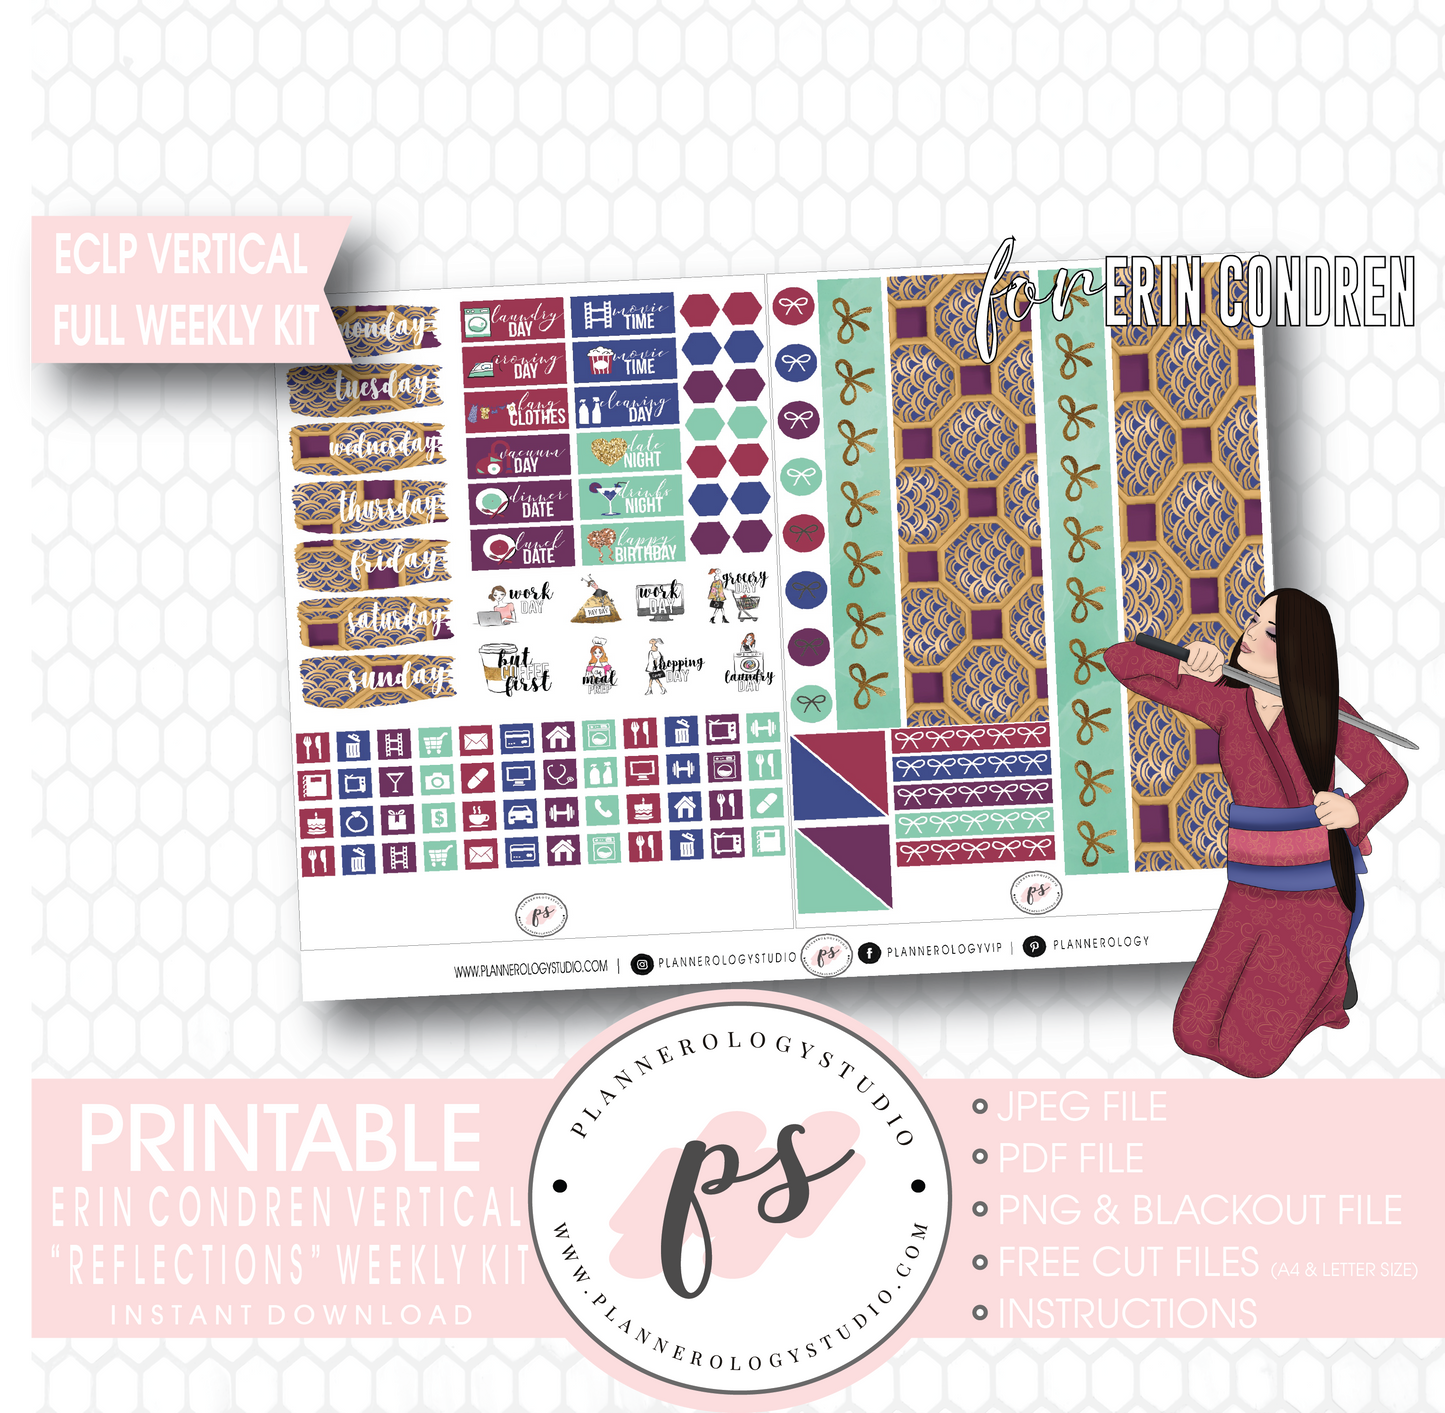 Reflections (Mulan Inspired) Full Weekly Kit Printable Planner Digital Stickers (for use with Erin Condren Vertical) - Plannerologystudio